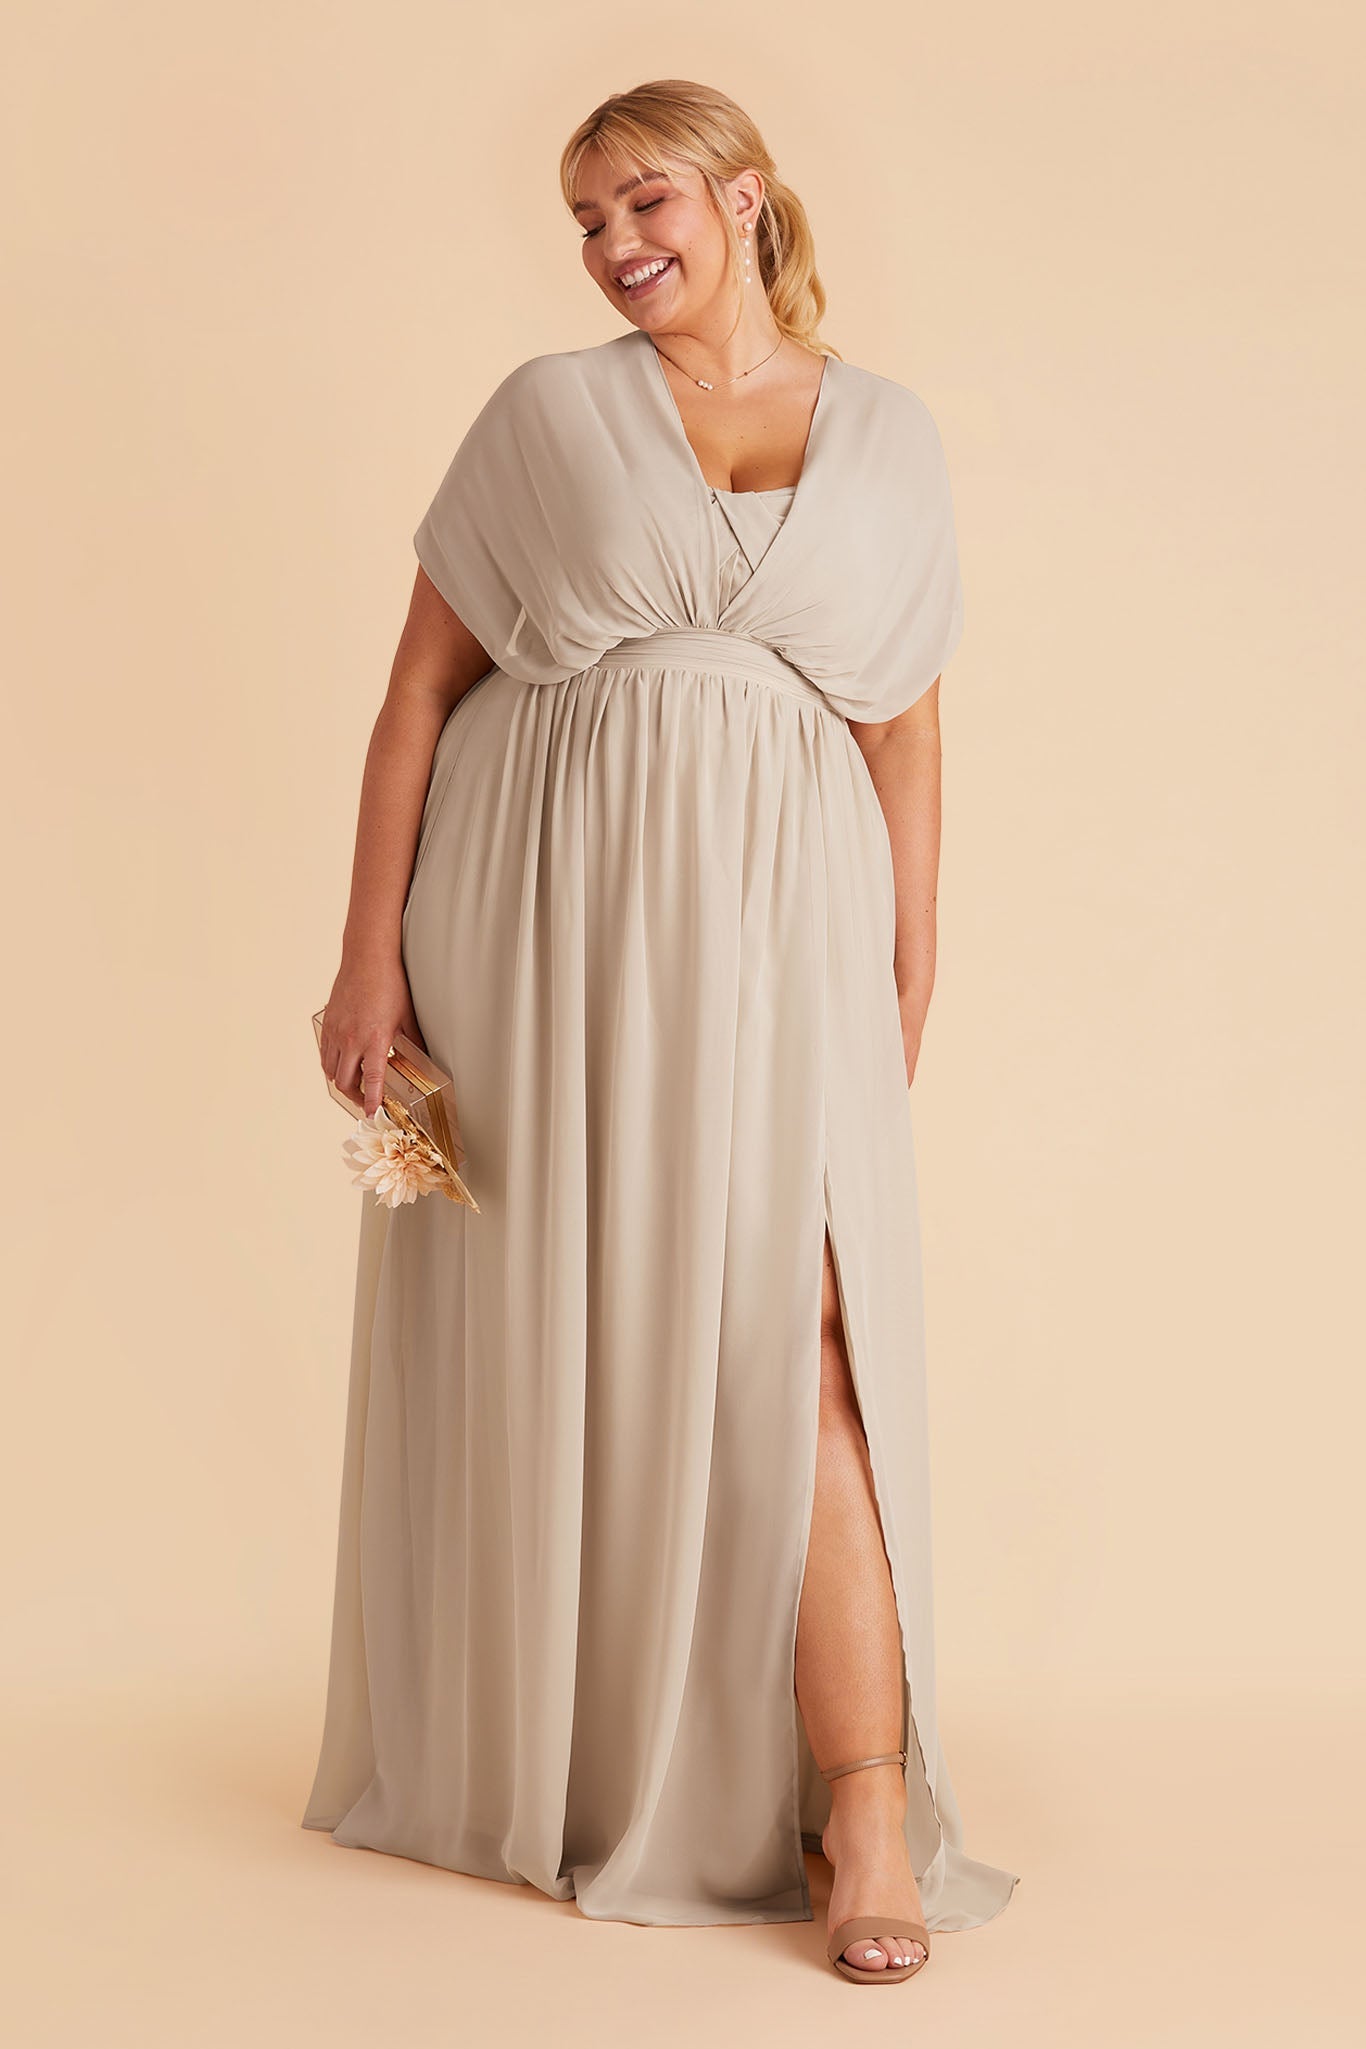 Grace plus size convertible bridesmaid dress in Neutral Champagne Chiffon by Birdy Grey, front view